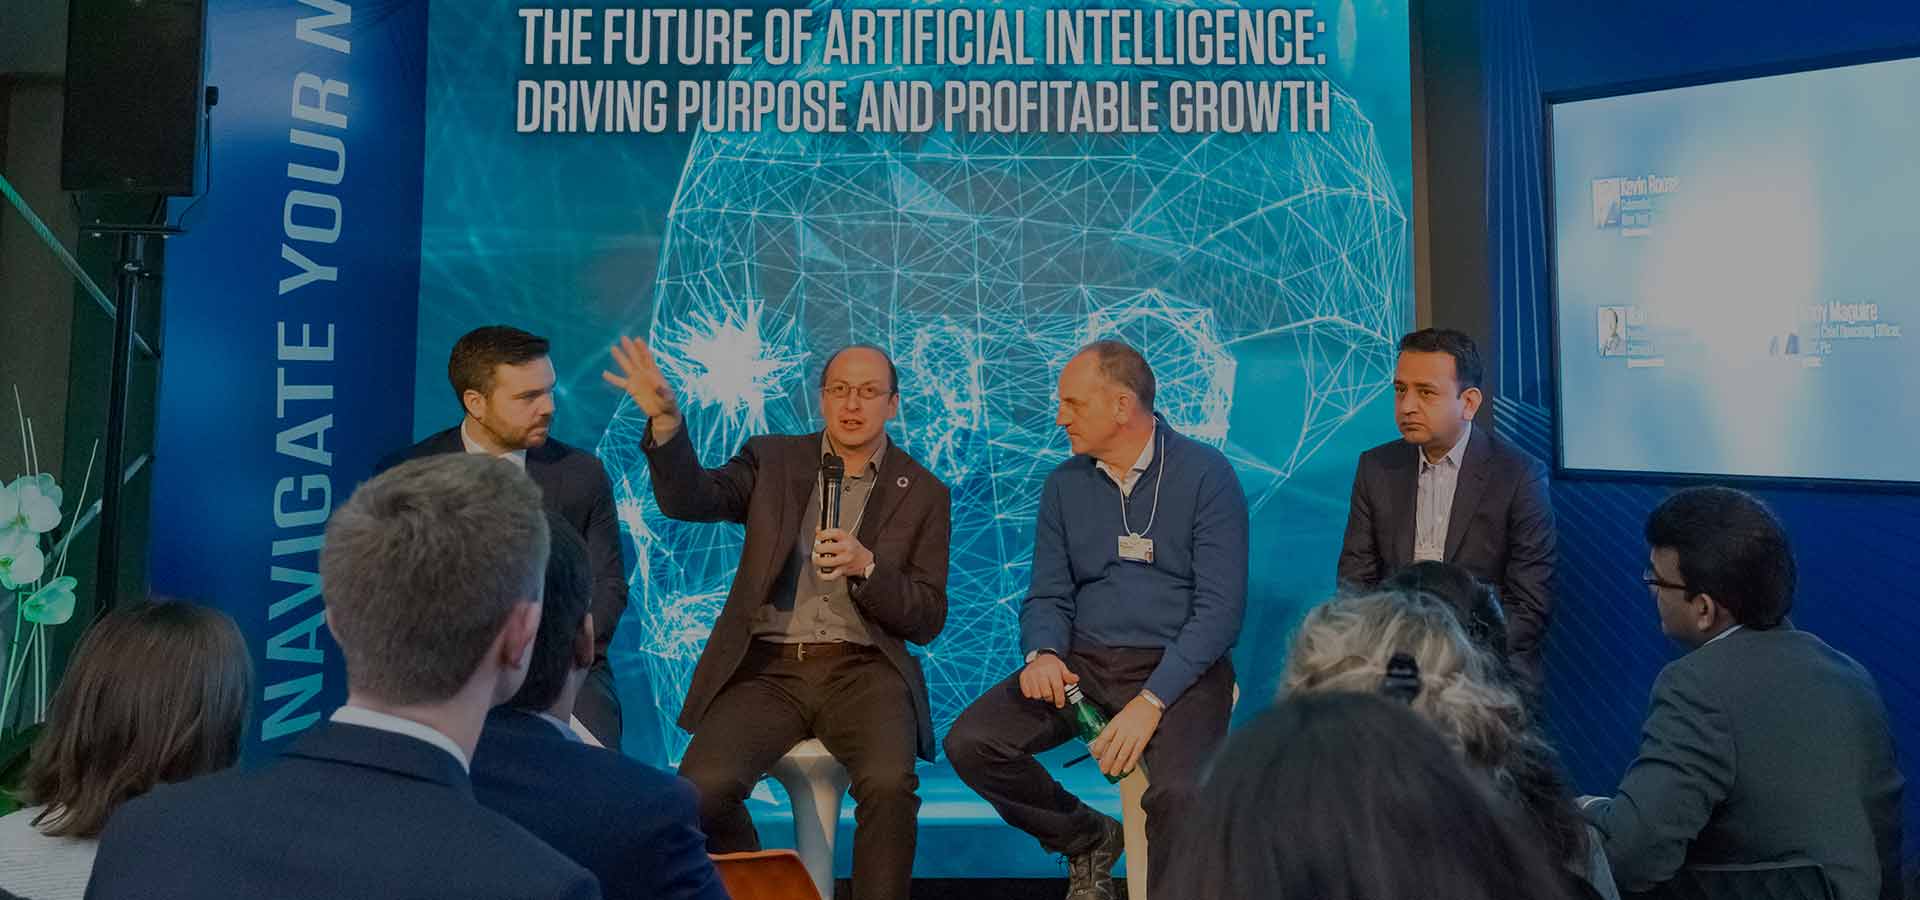 Future of Artificial Intelligence: Driving Purpose and Profitable Growth